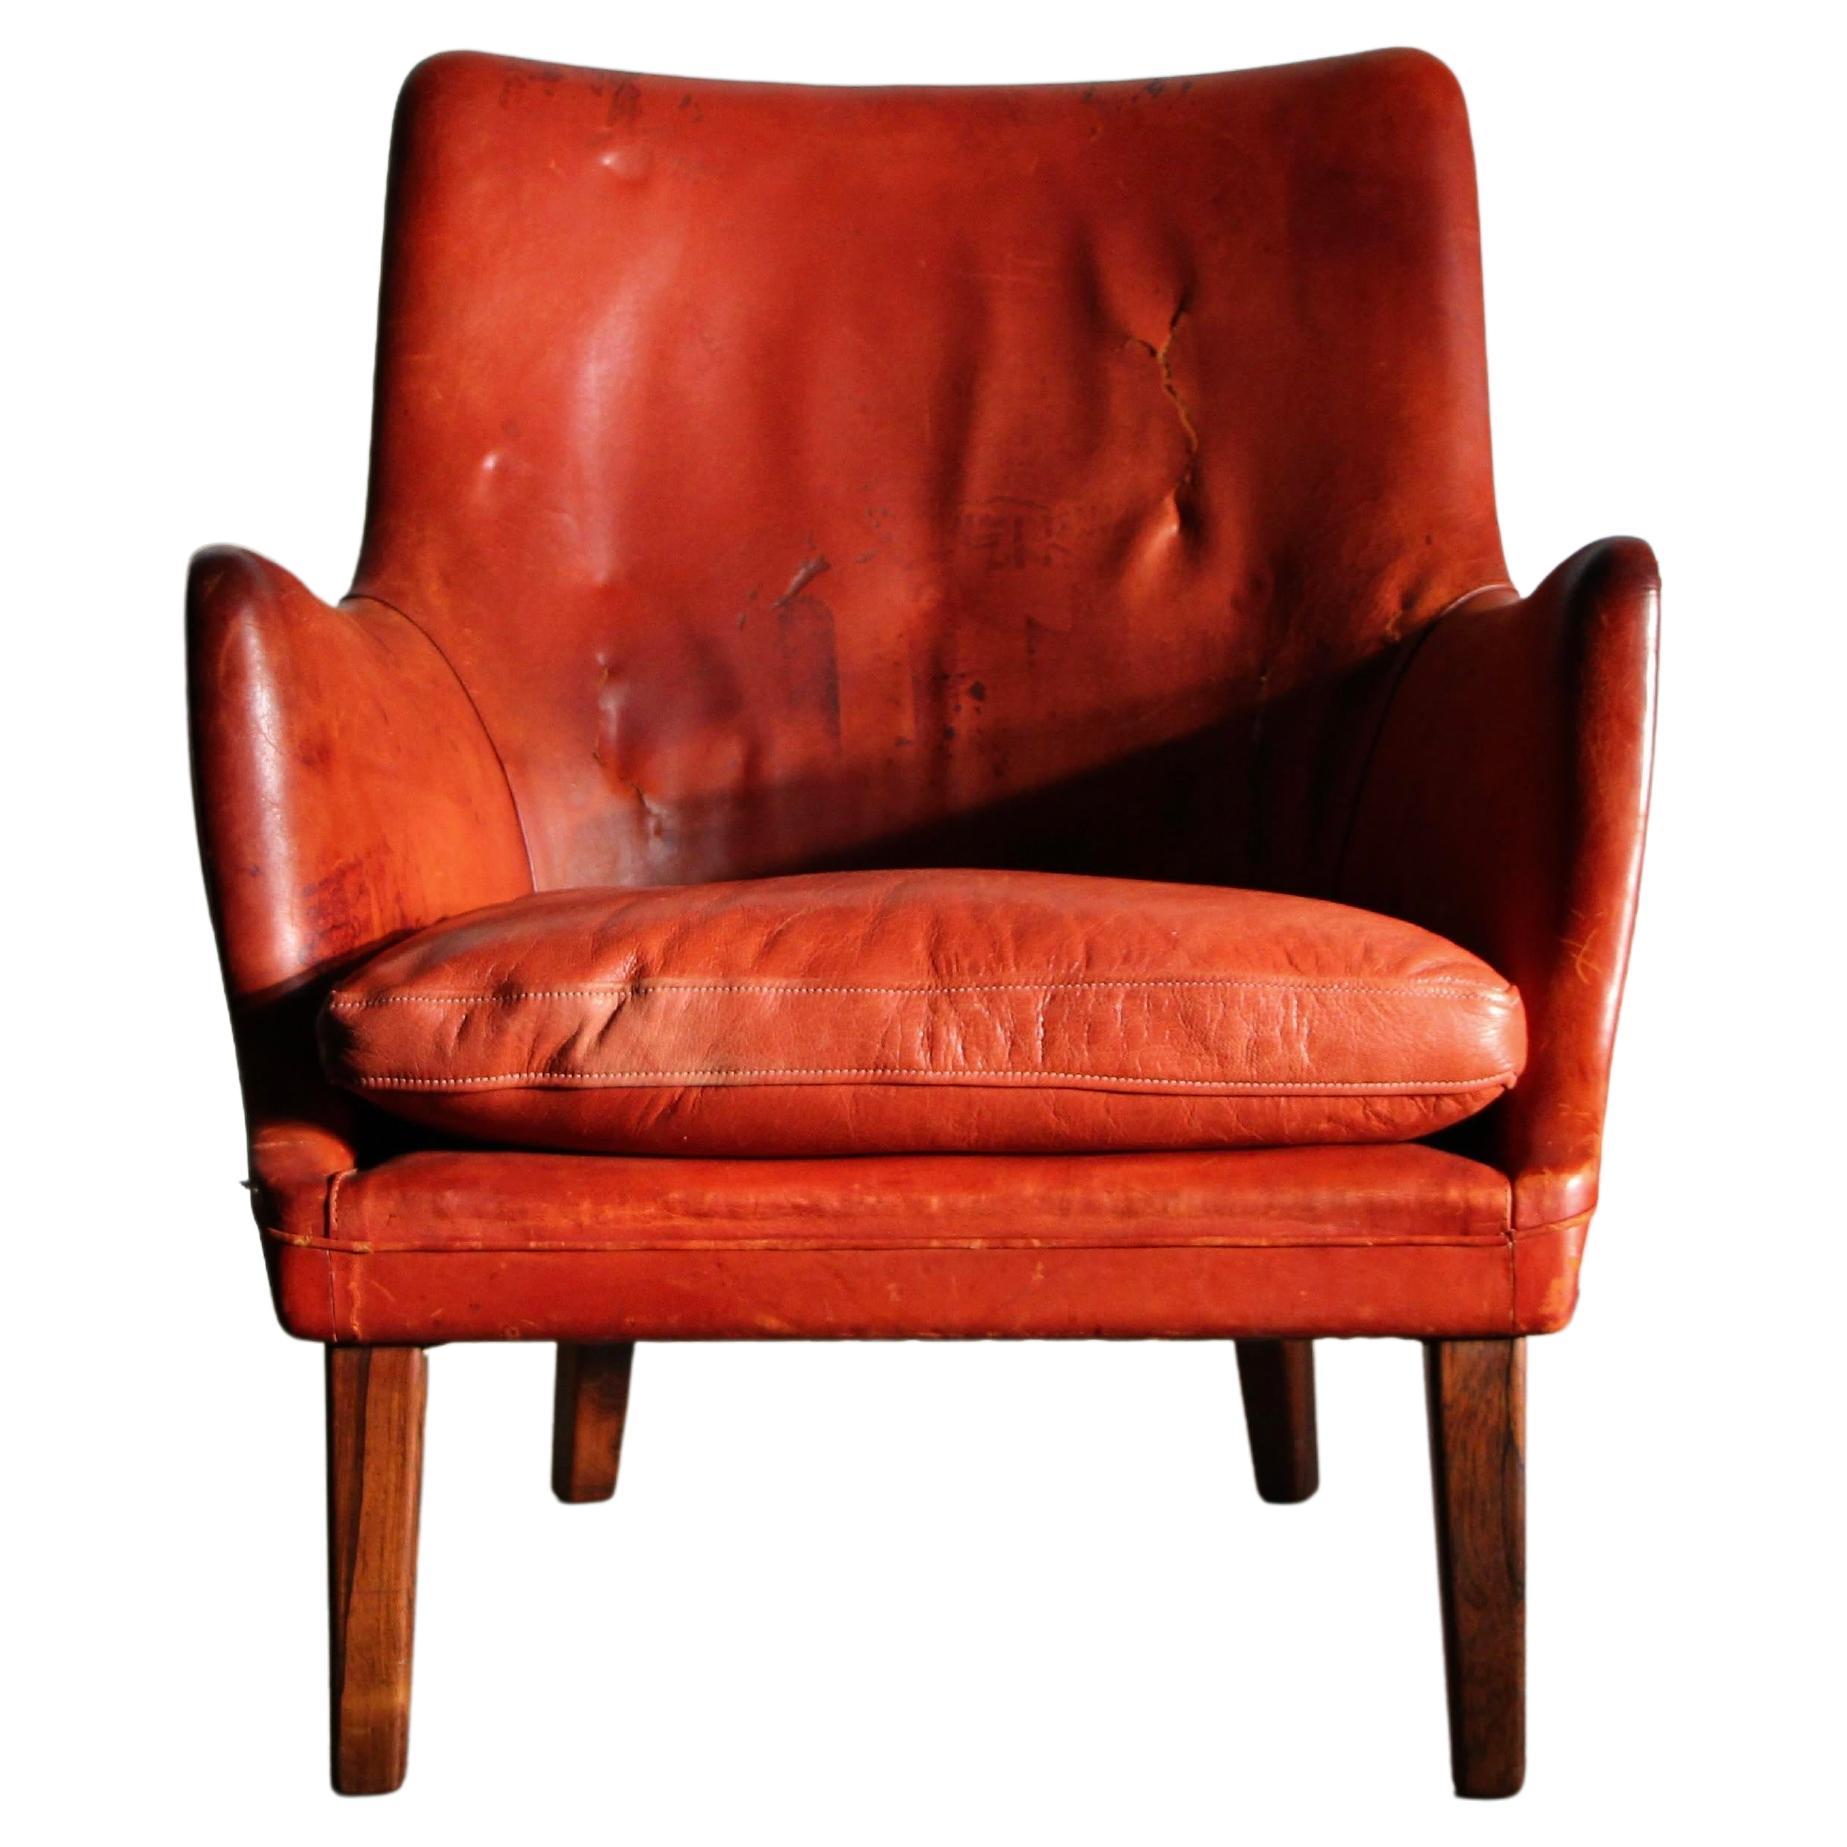 Arne Vodder "AV 53" Lounge Chair in Original Leather and Rosewood For Sale